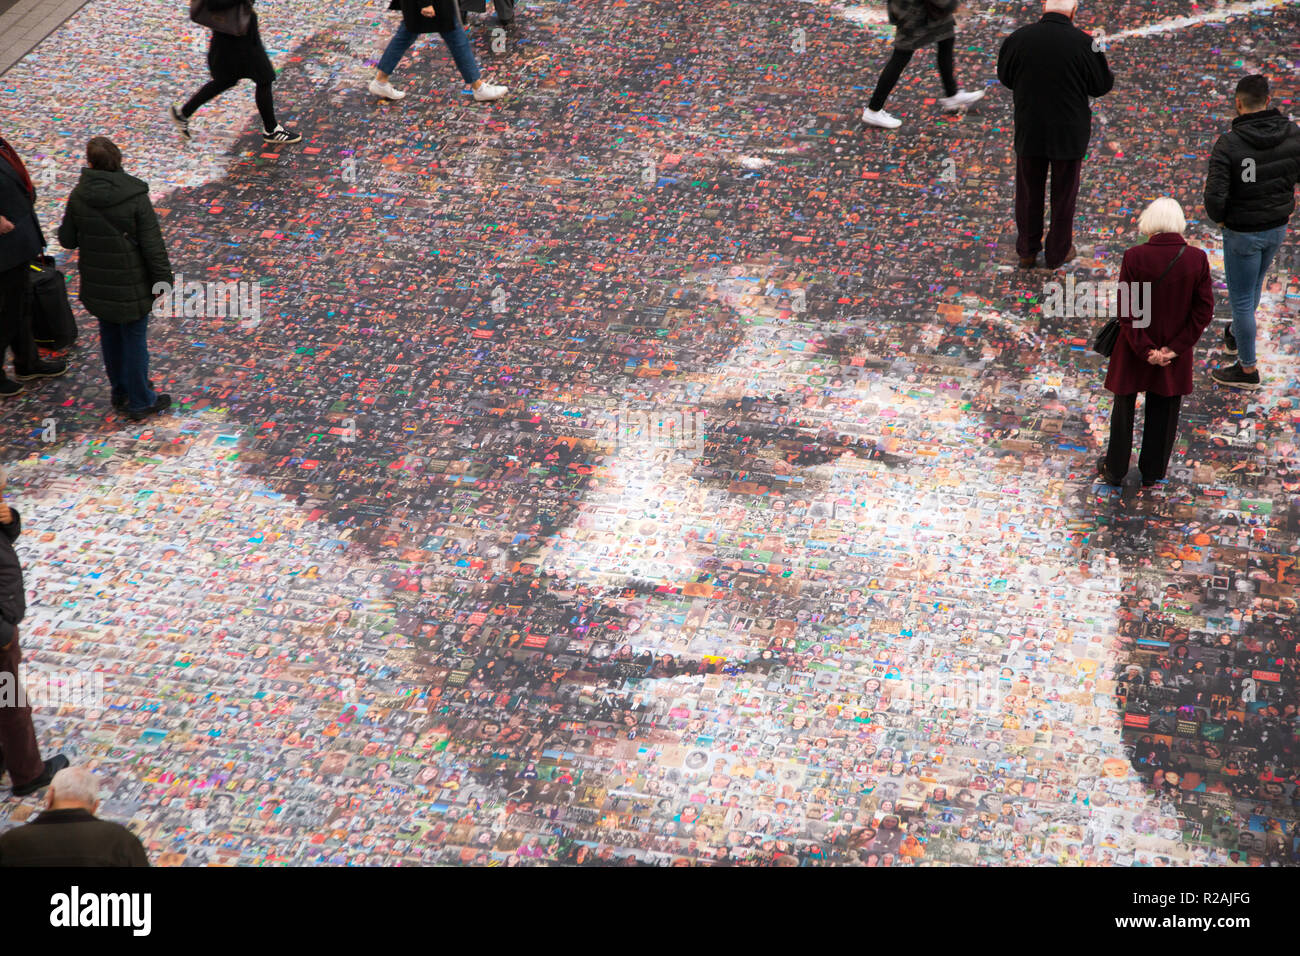 Birmingham, UK. 18th November 2018. A giant mosaic portrait of suffragette Hilda Burkitt  at Birmingham New Street station. The 20m (65ft) image is made up 3,724 selfies and other photos of women sent in from across the UK. The project, titled Face of Suffrage, is the brainchild of artist Helen Marshall and marks 100 years since the first British women voted. Credit: steven roe/Alamy Live News Stock Photo